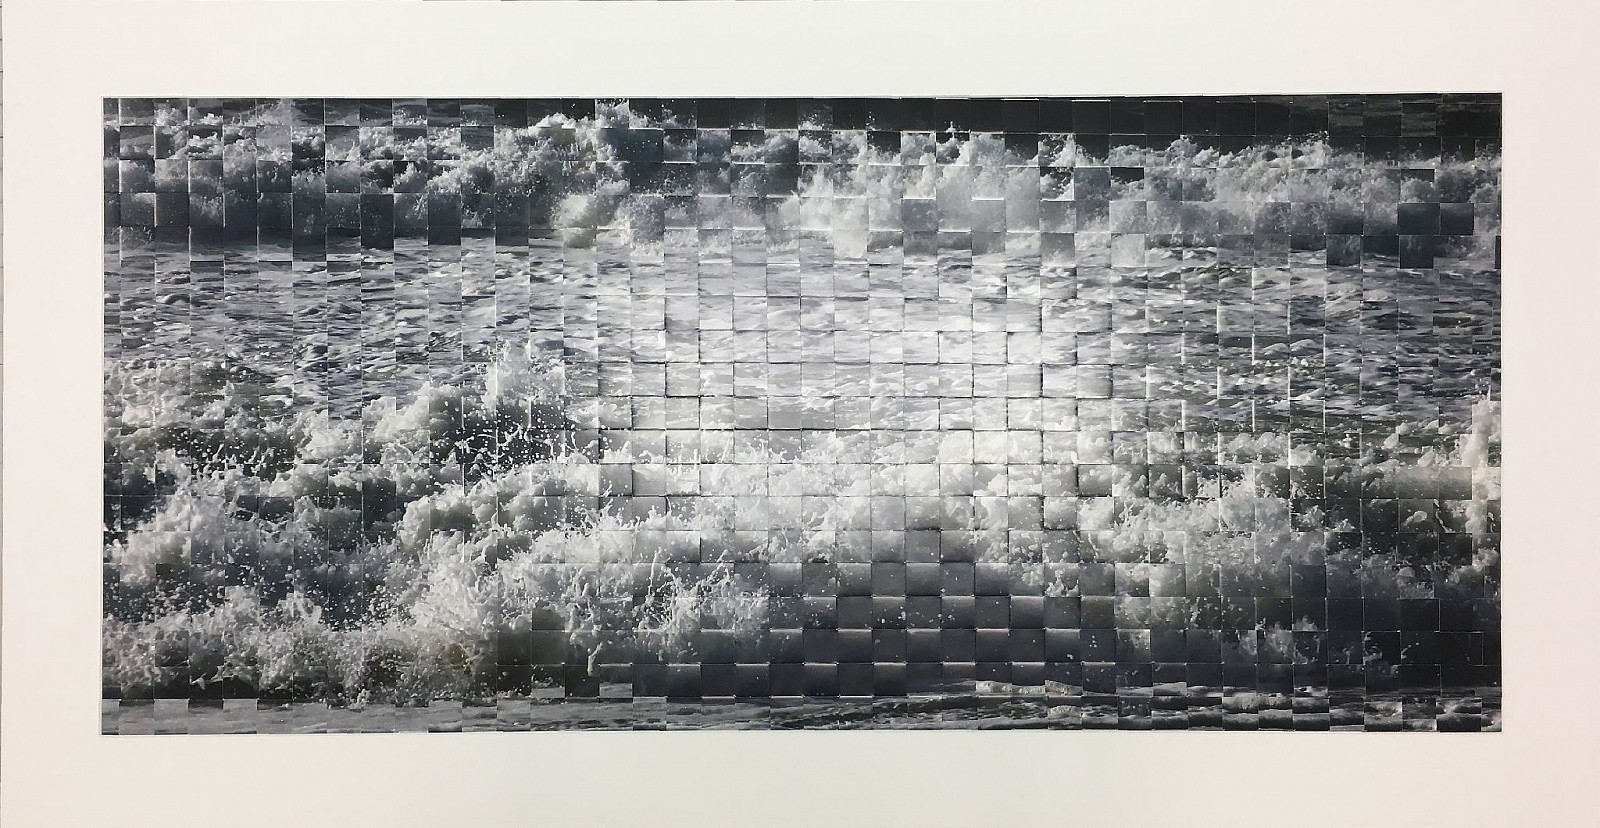 Debranne Cingari, Churning, 2020
Handcrafted Weave Canson Archival Photograph, 19 1/2 x 42 in. (49.5 x 106.7 cm)
DC200601